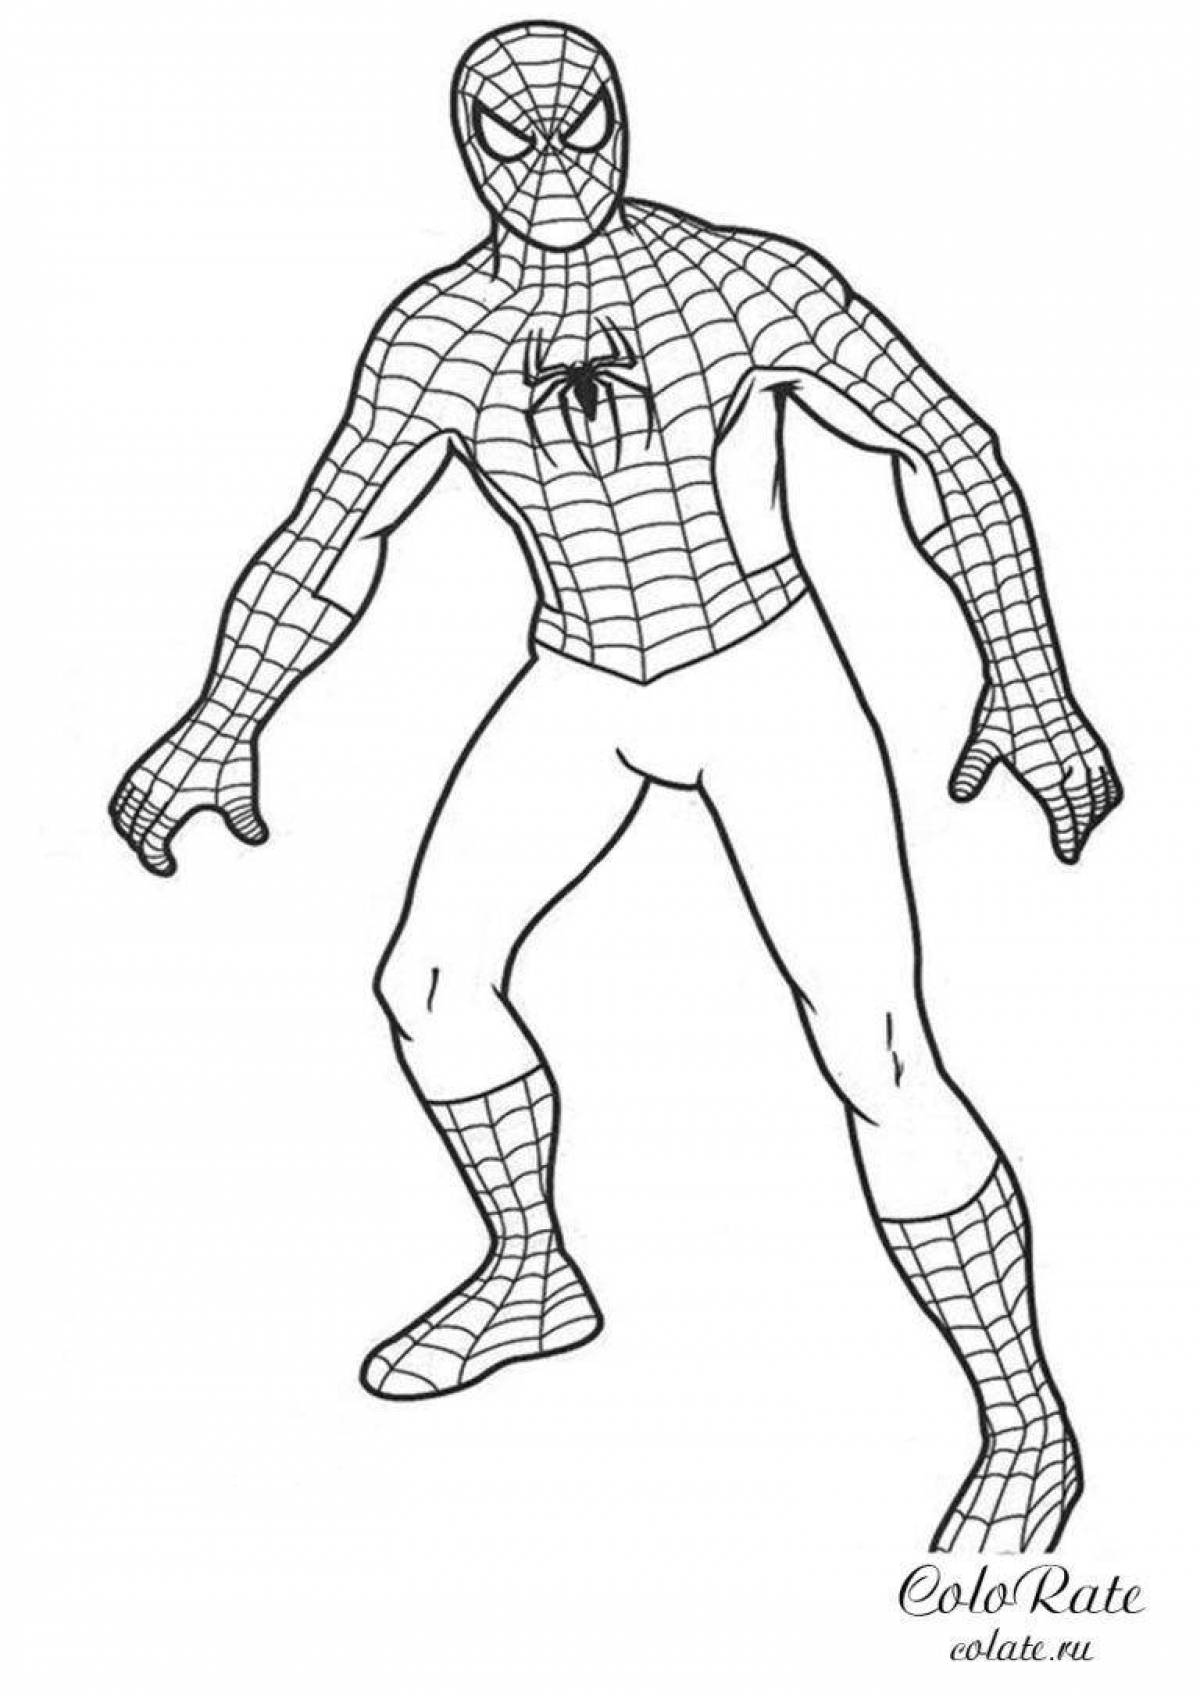 Coloring page nice spiderman